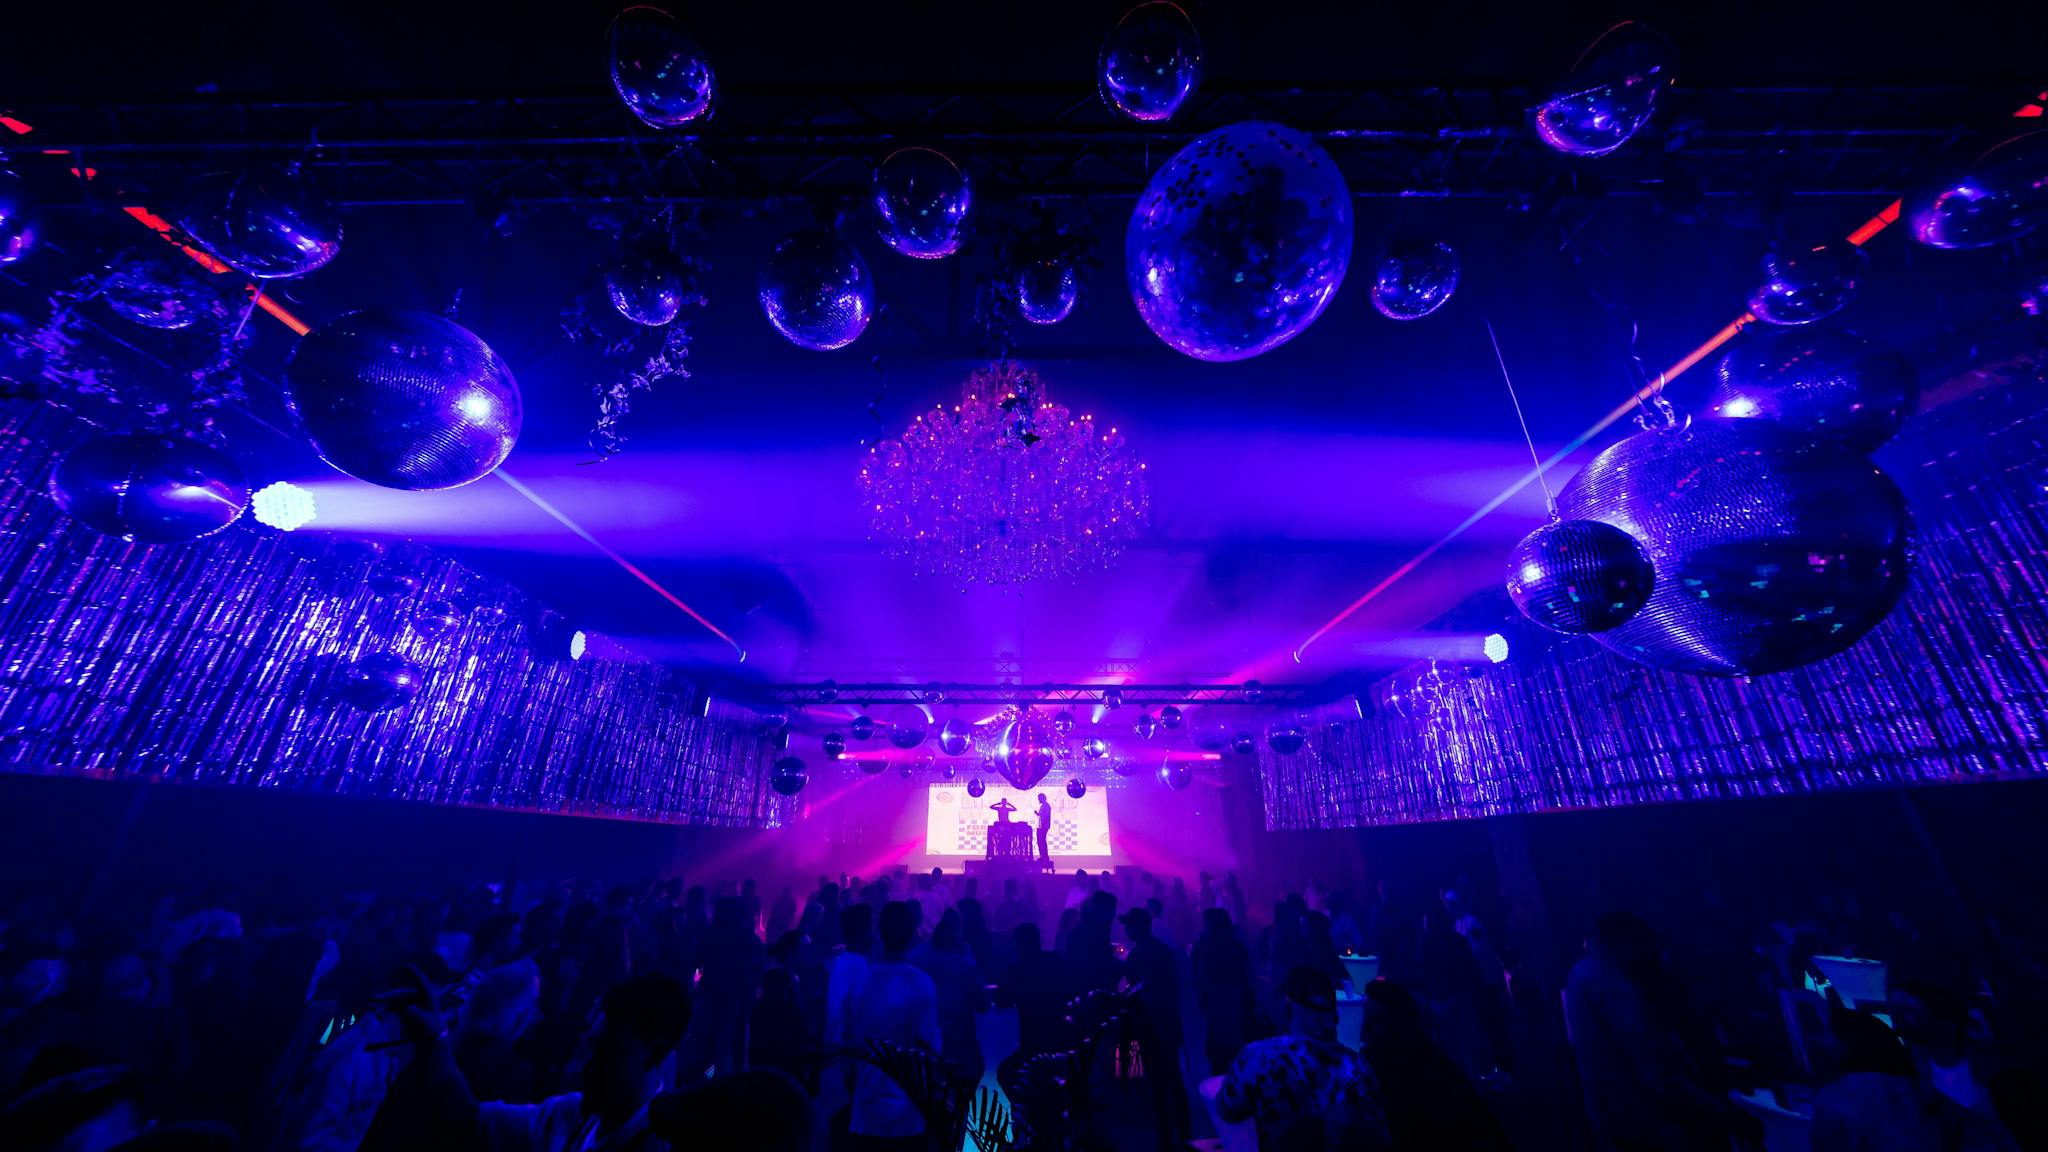 Large mirror balls hang above a crowd as a DJ plays on stage to a crowded room